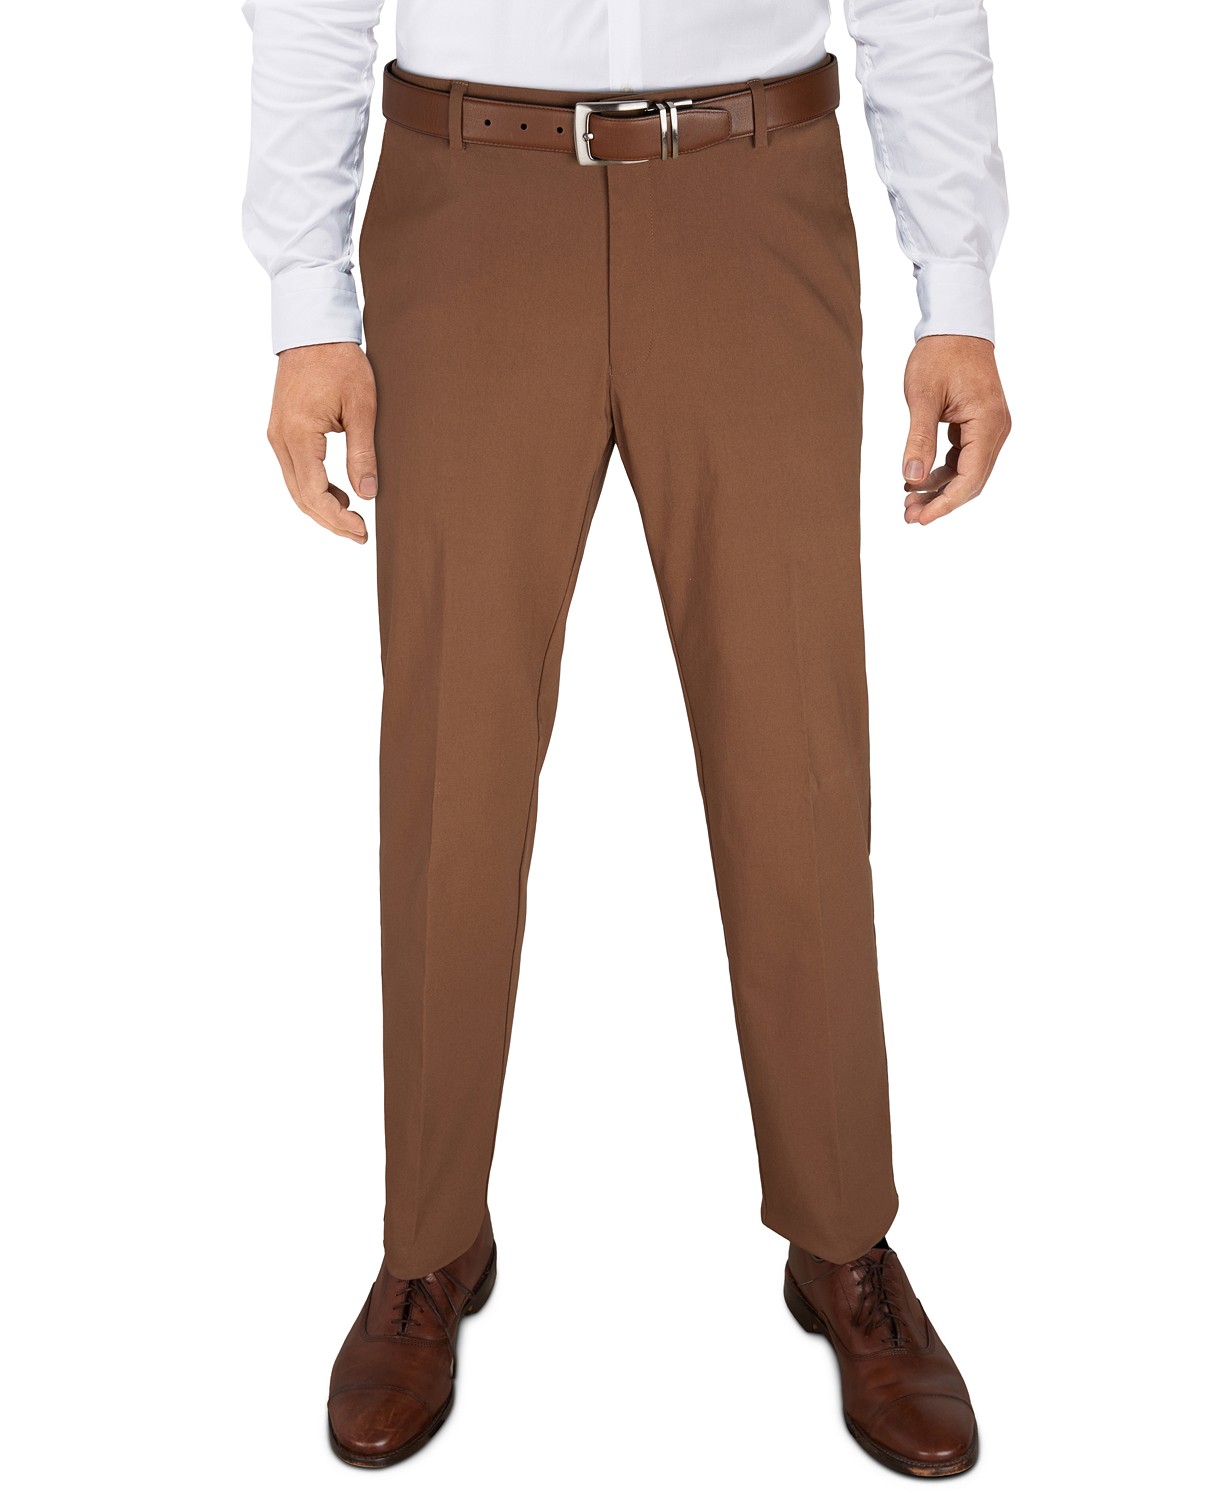 woocommerce-673321-2209615.cloudwaysapps.com-tommy-hilfiger-mens-brown-modern-fit-th-flex-stretch-comfort-solid-performance-pants